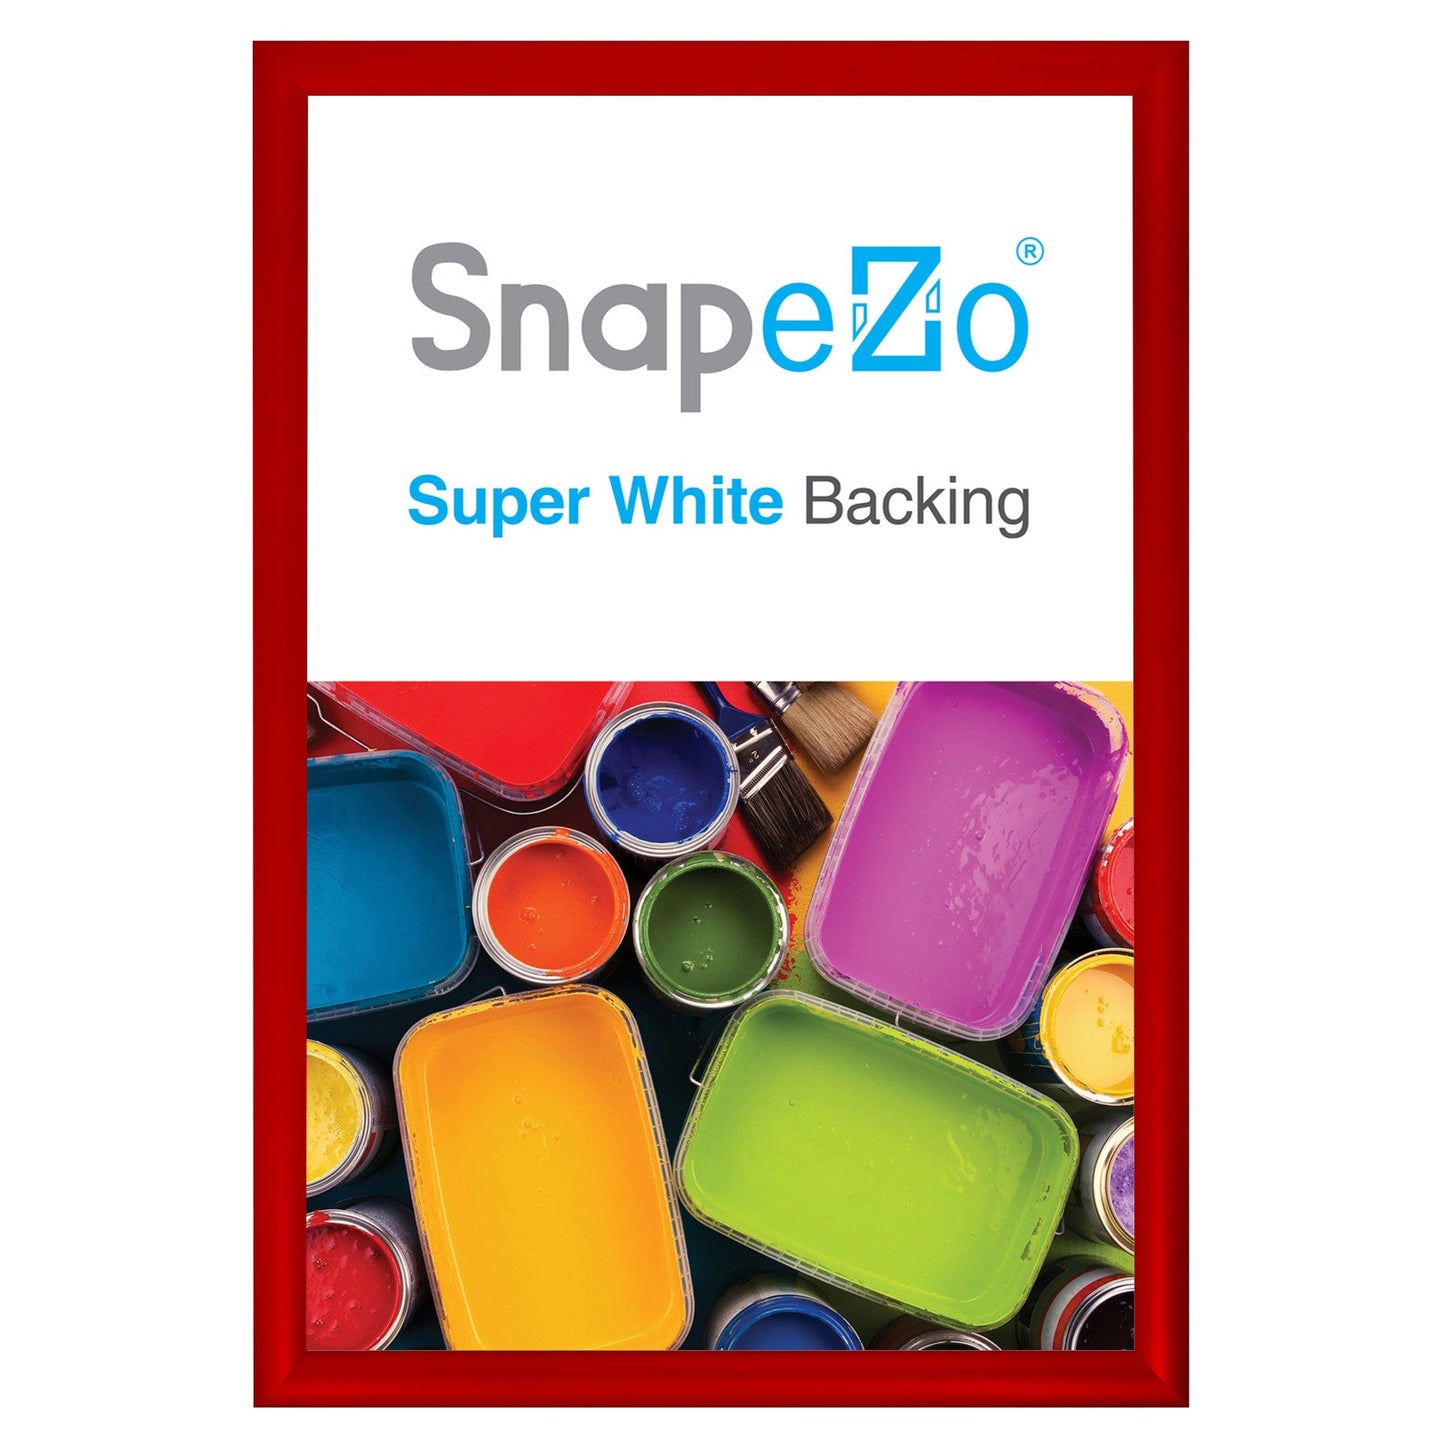 Load image into Gallery viewer, 19x28 Red SnapeZo® Snap Frame - 1.2&amp;quot; Profile
